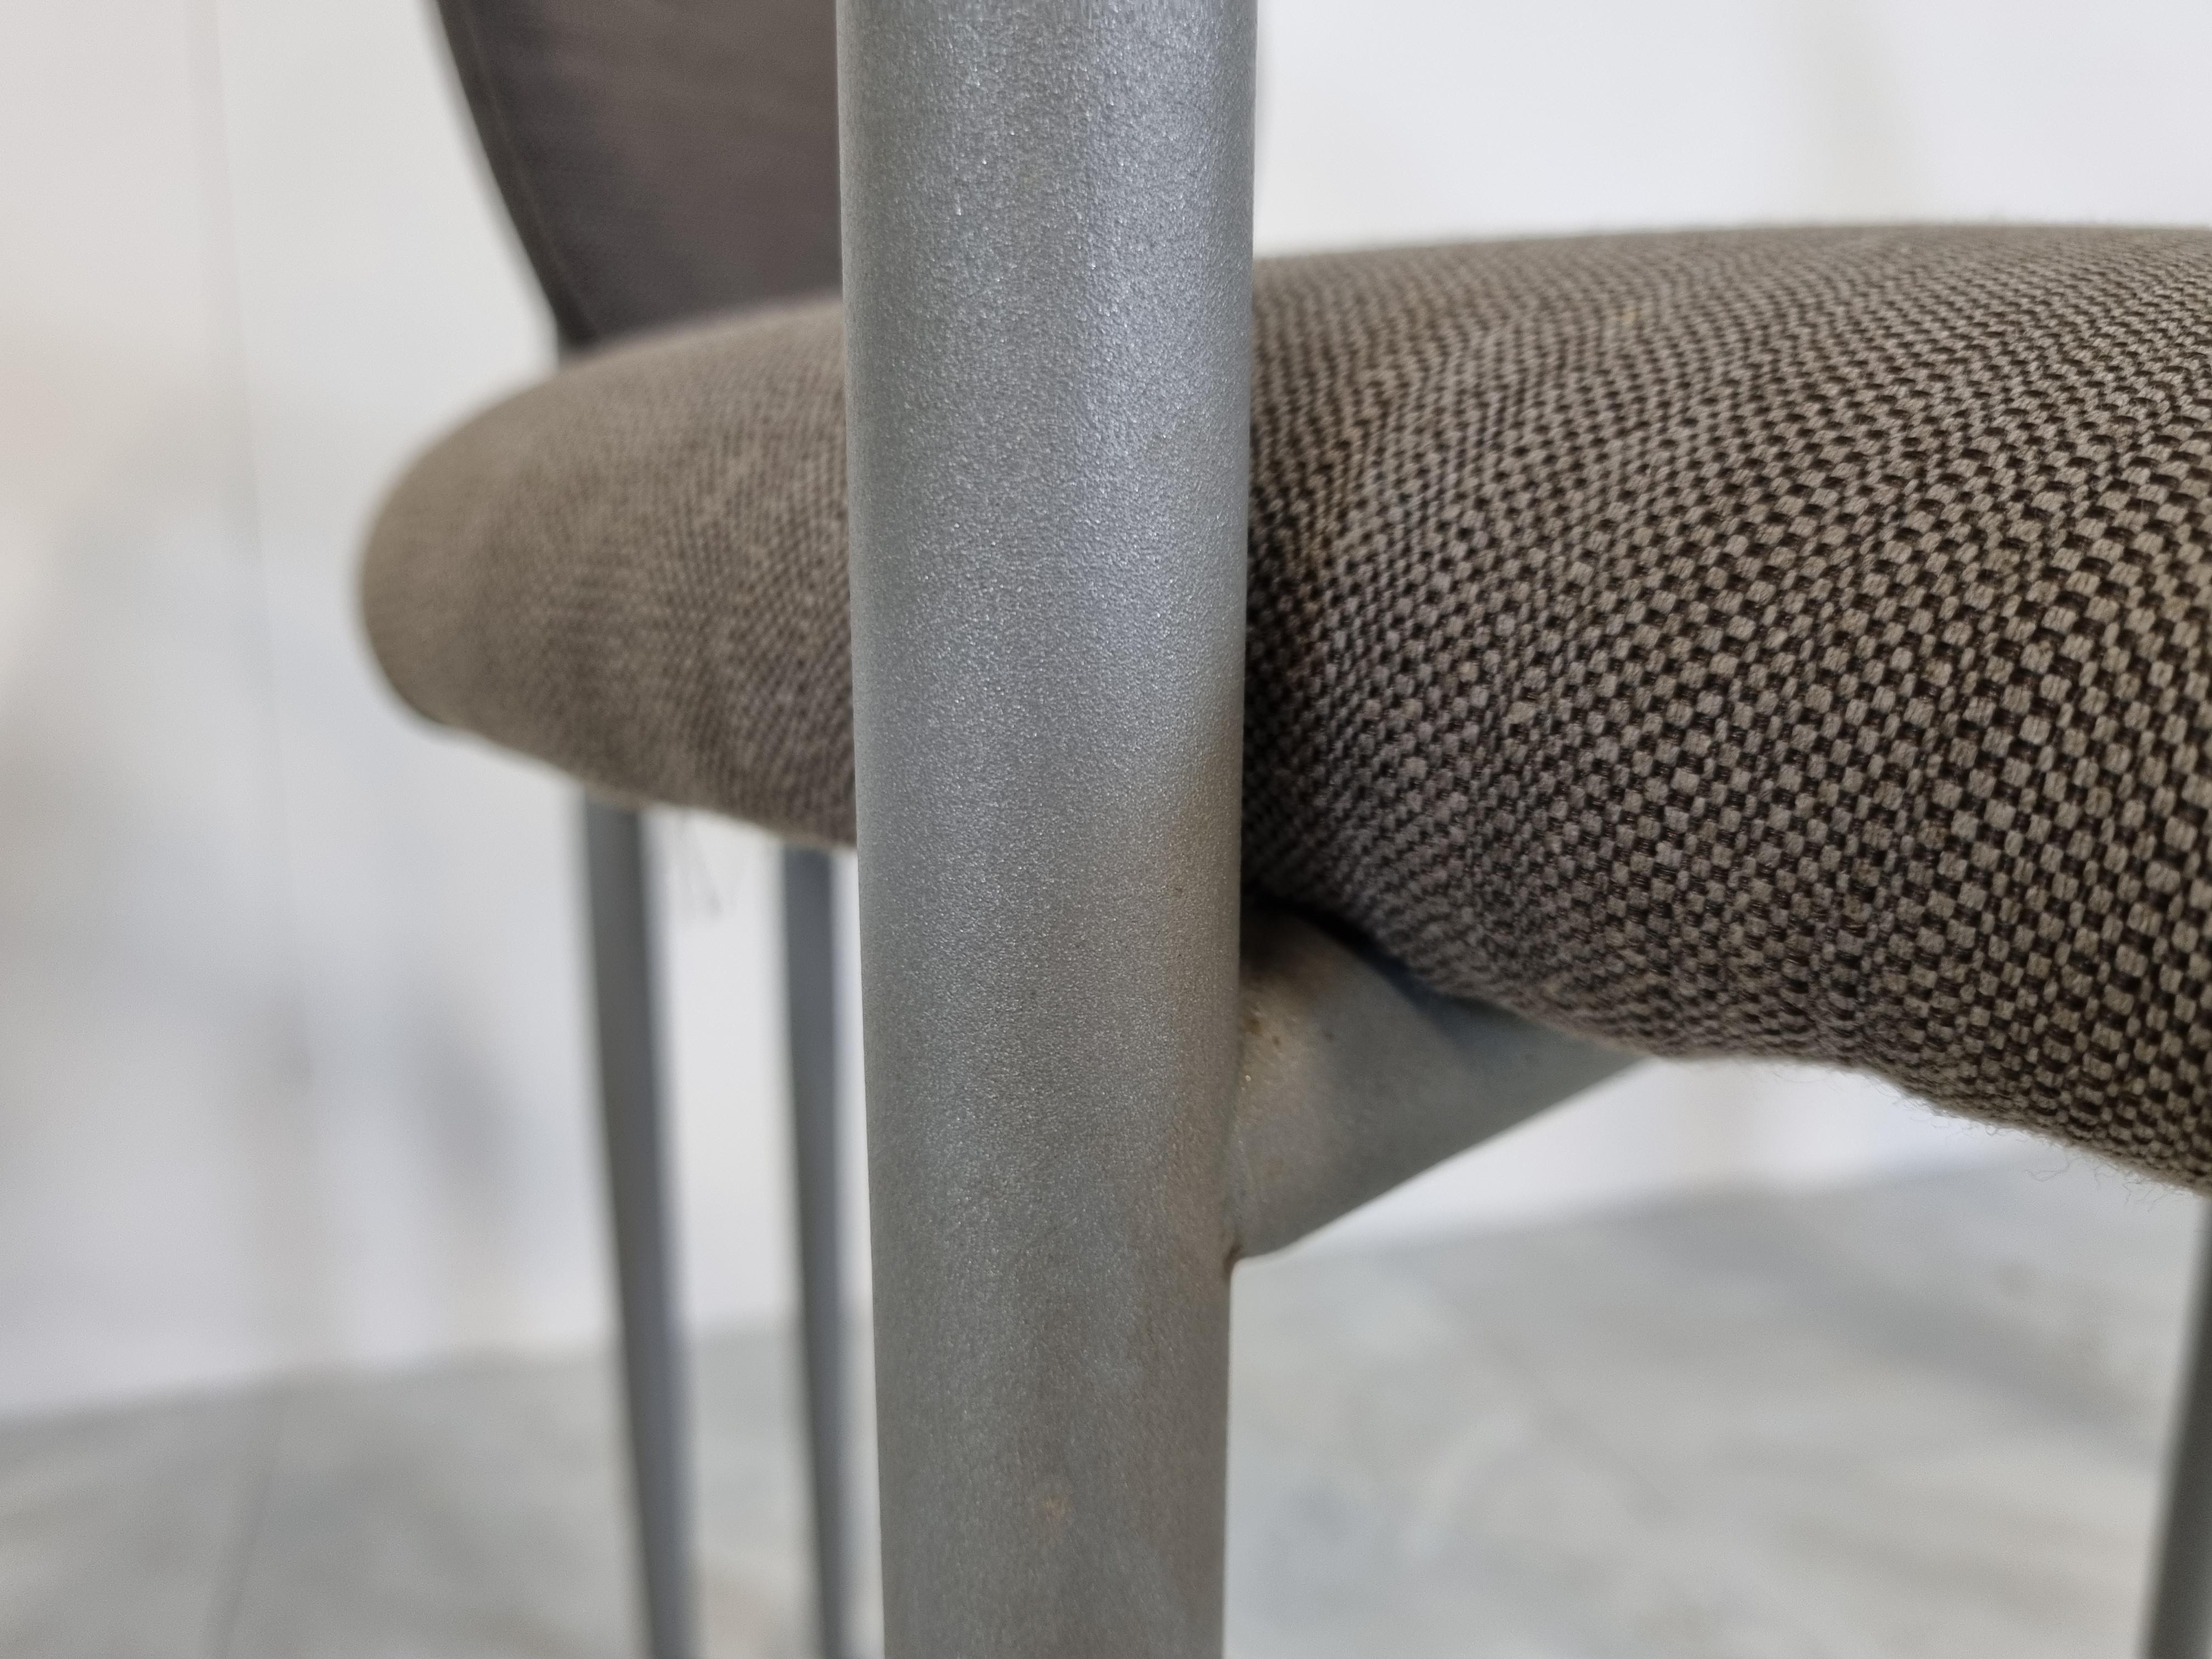 Set of four elegant dining room chairs manufactured by Belgochrom.

Nicely designed metal frames with elegant legs. Uphosltered in grey fabric with powdercoated frames.

Belgochrom used to produce high end furniture and was the higher